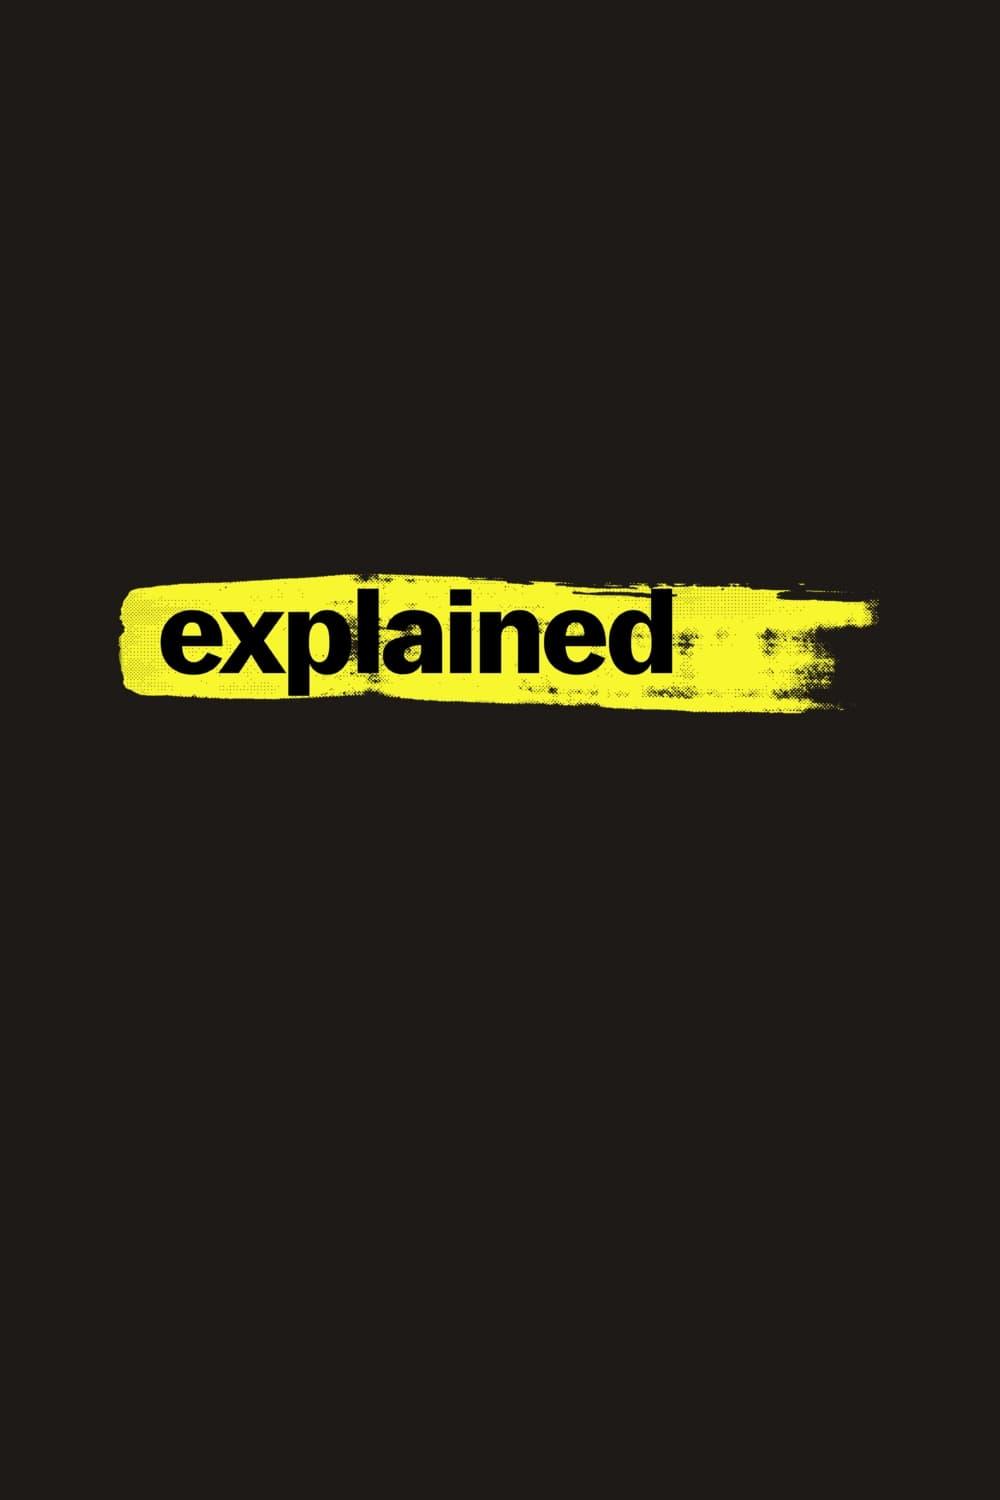 Explained poster